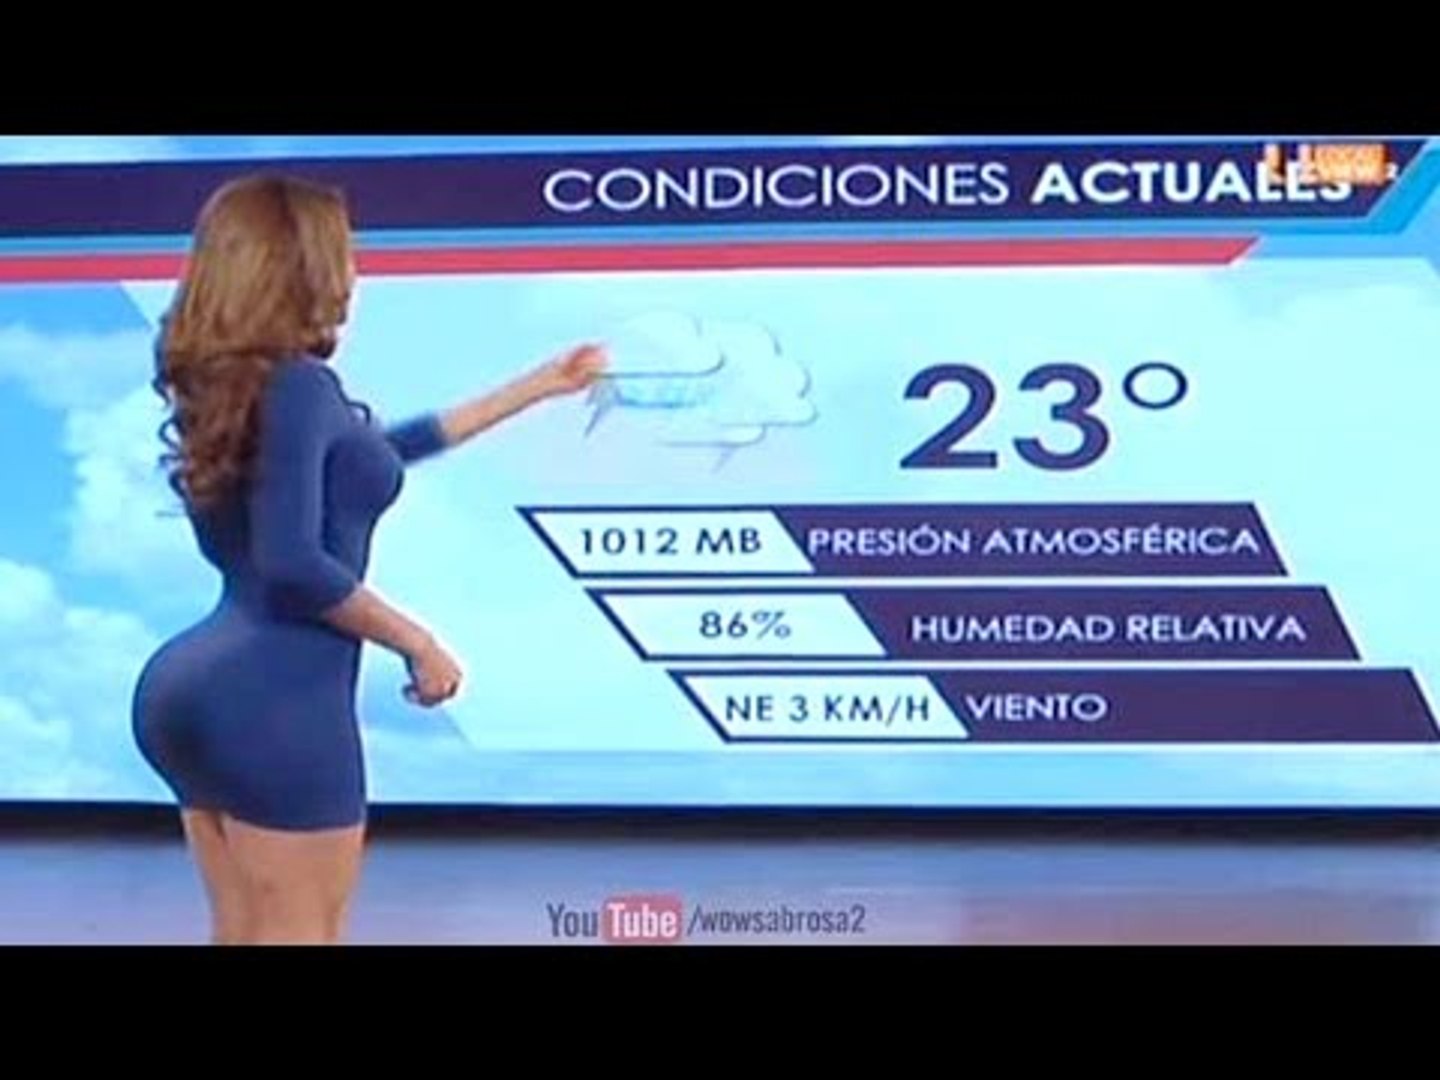 Sexy mexican weather lady